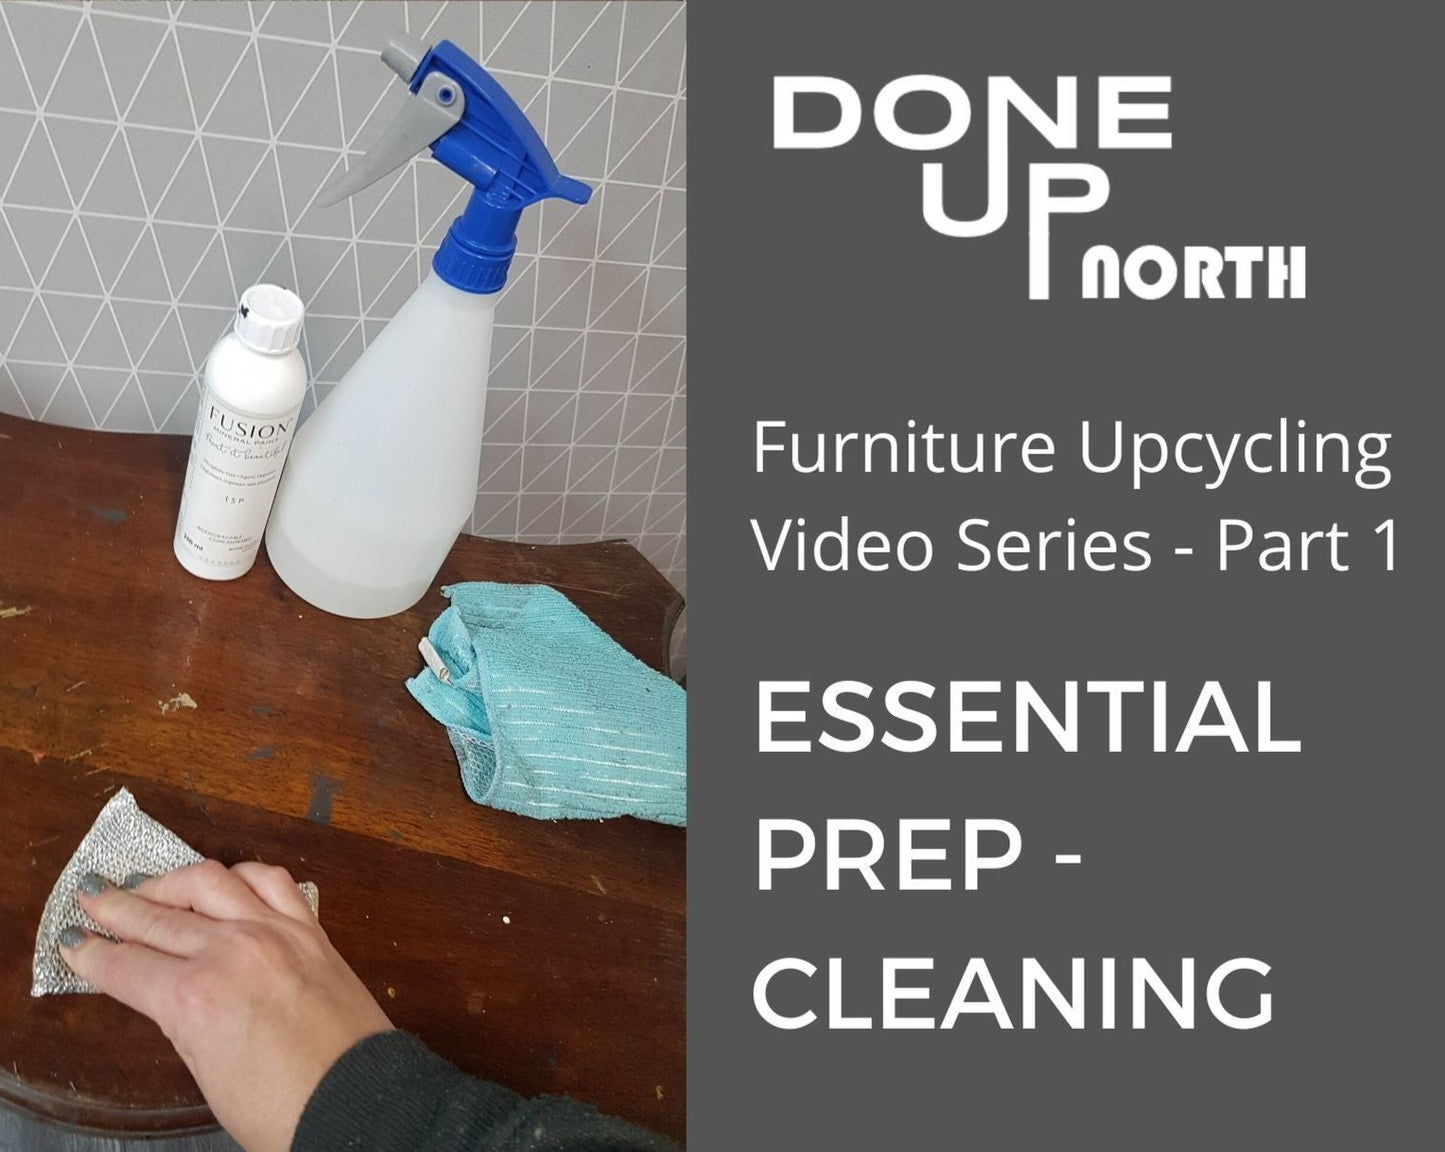 VIDEO CLASS:  Essential Prep - Cleaning